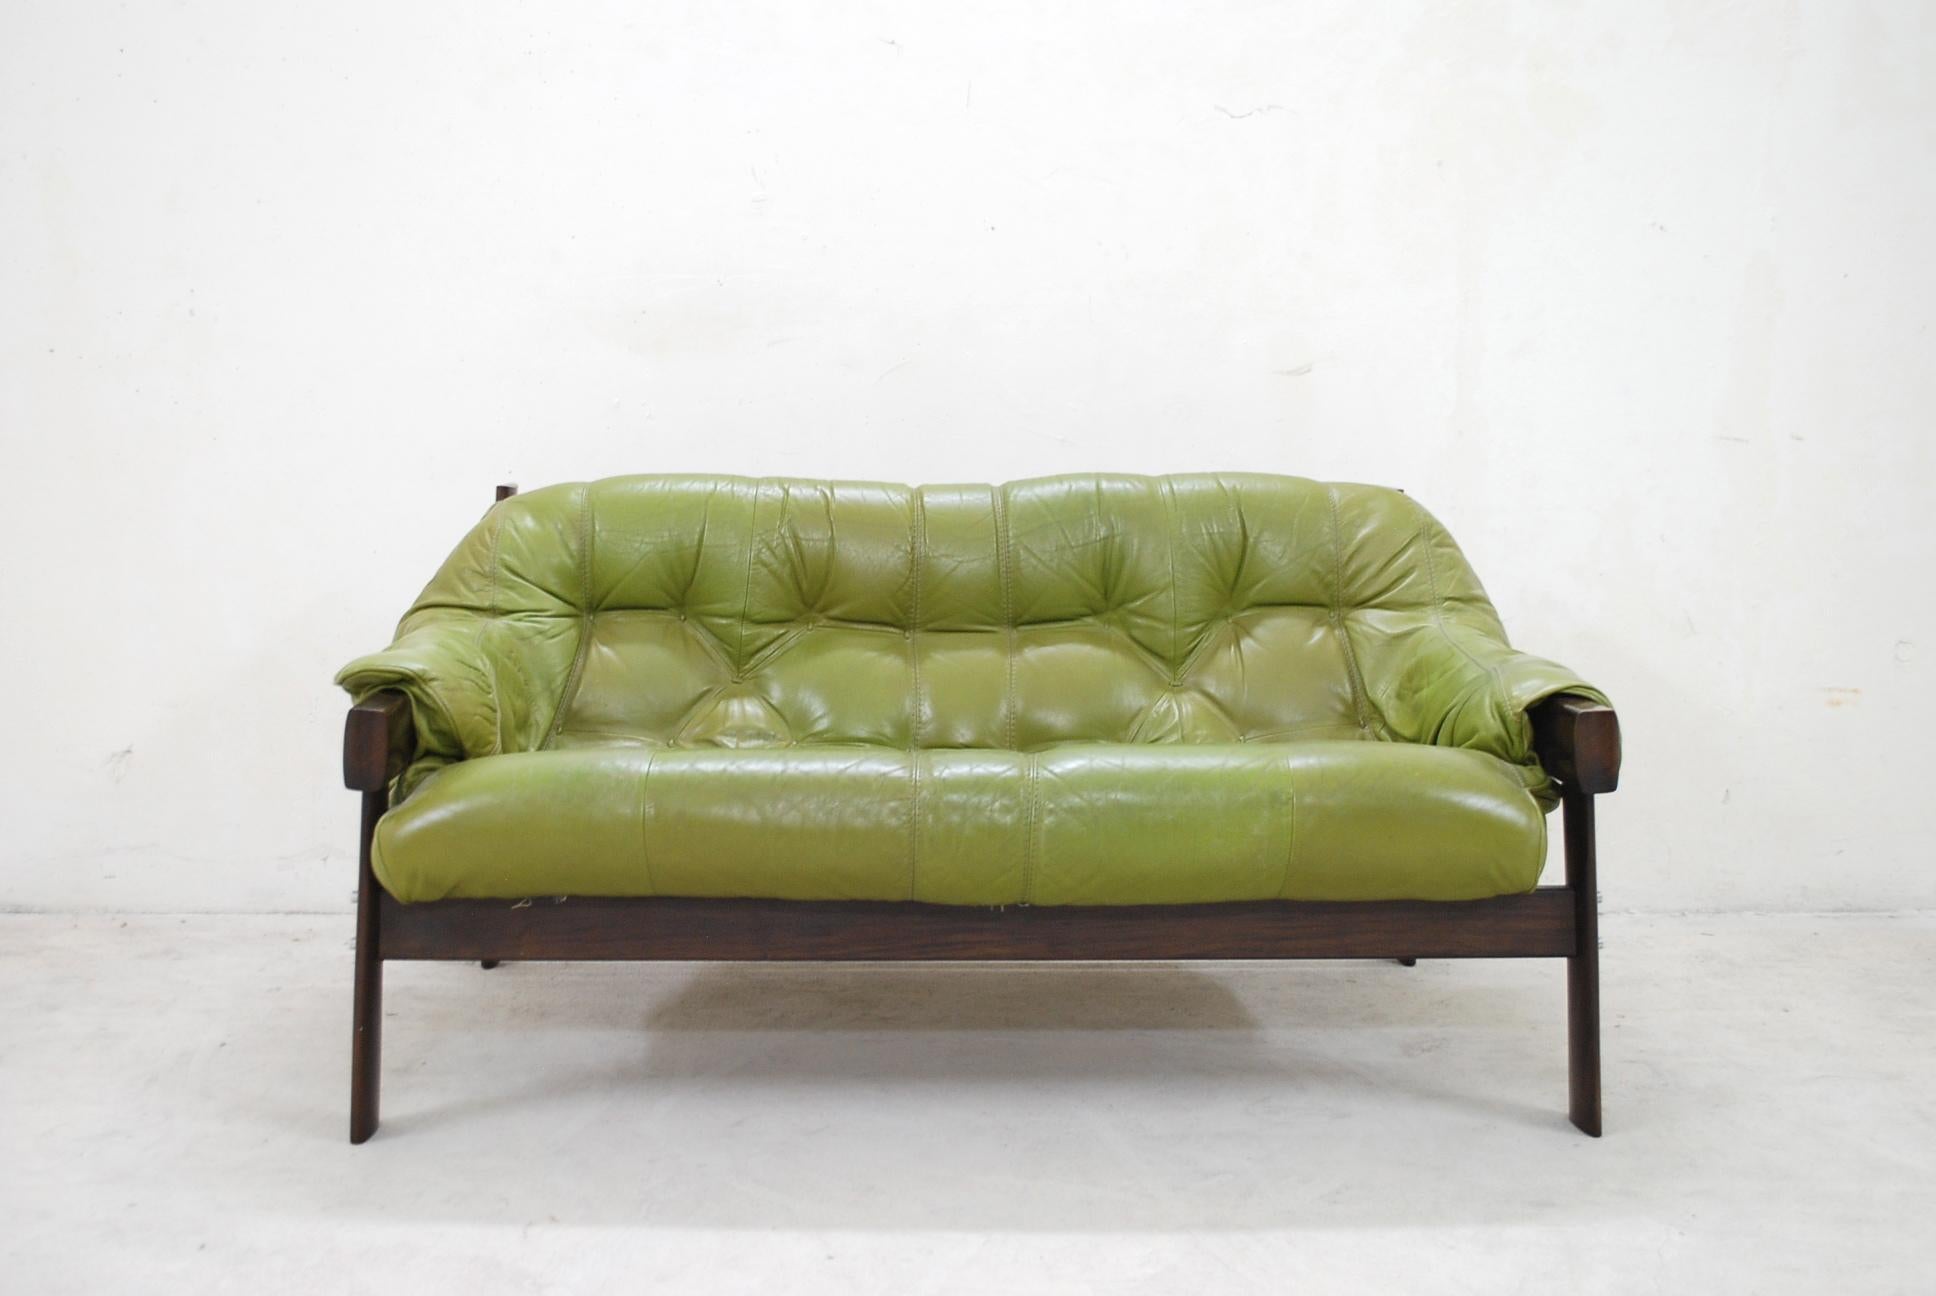 This 2-seat leather sofa were designed by Percival Lafer in Brazil in 1961. Manufacture is Lafer furniture.
They feature wooden frames in Pau Ferro Wood with lime green leather upholstery, which has become beautifully patinated over time.
This